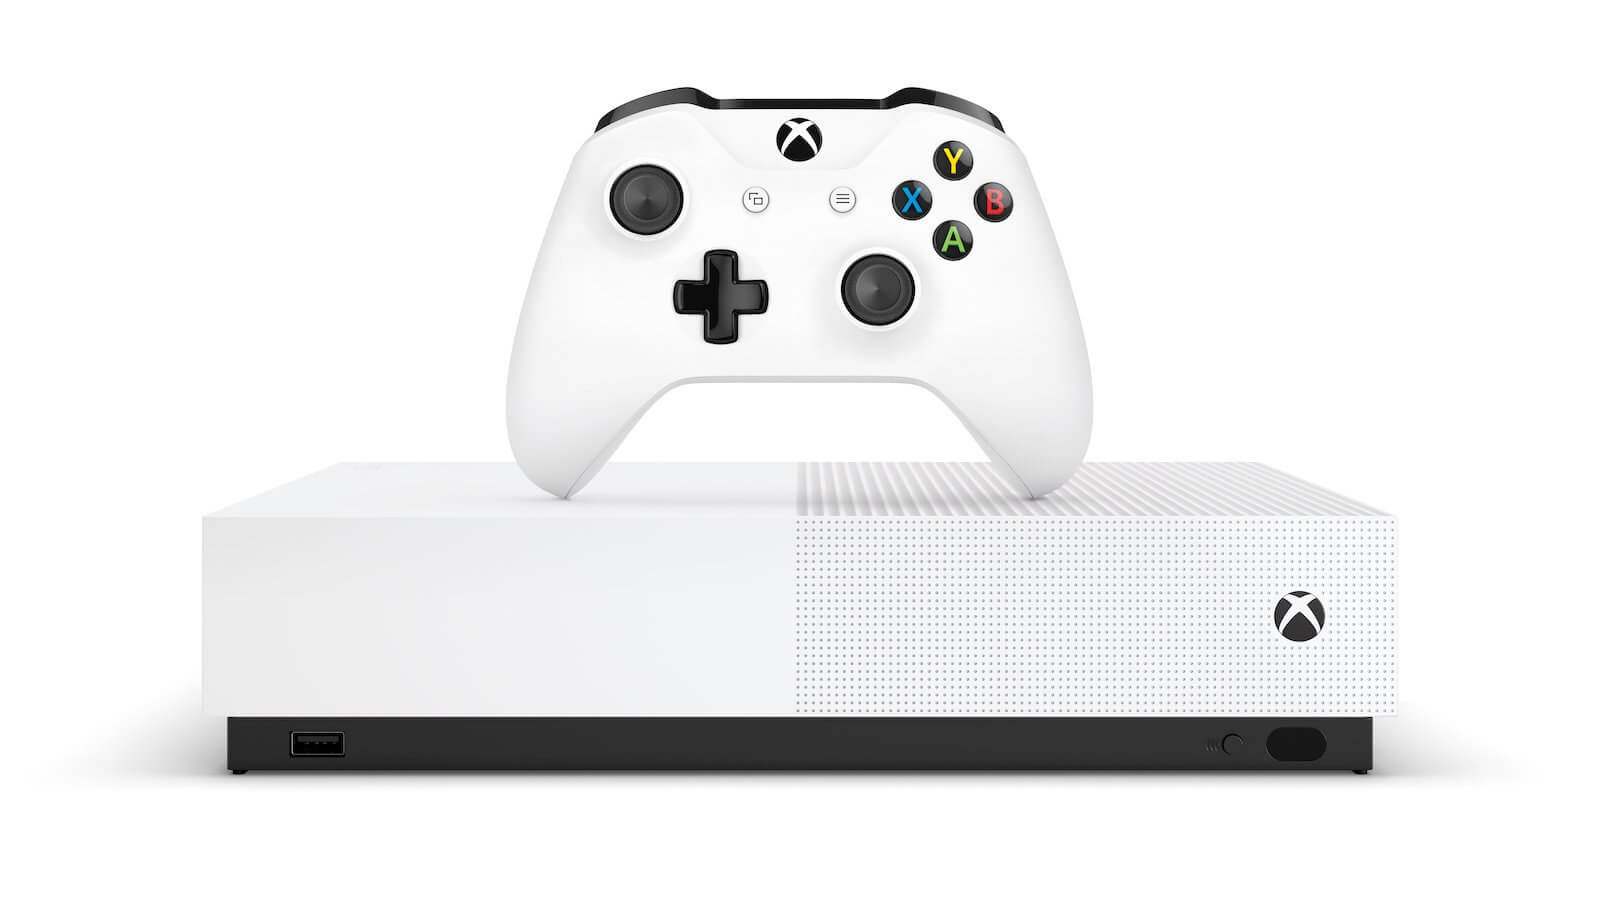 Microsoft's $250 'All-Digital' Xbox One S is now available for pre-order